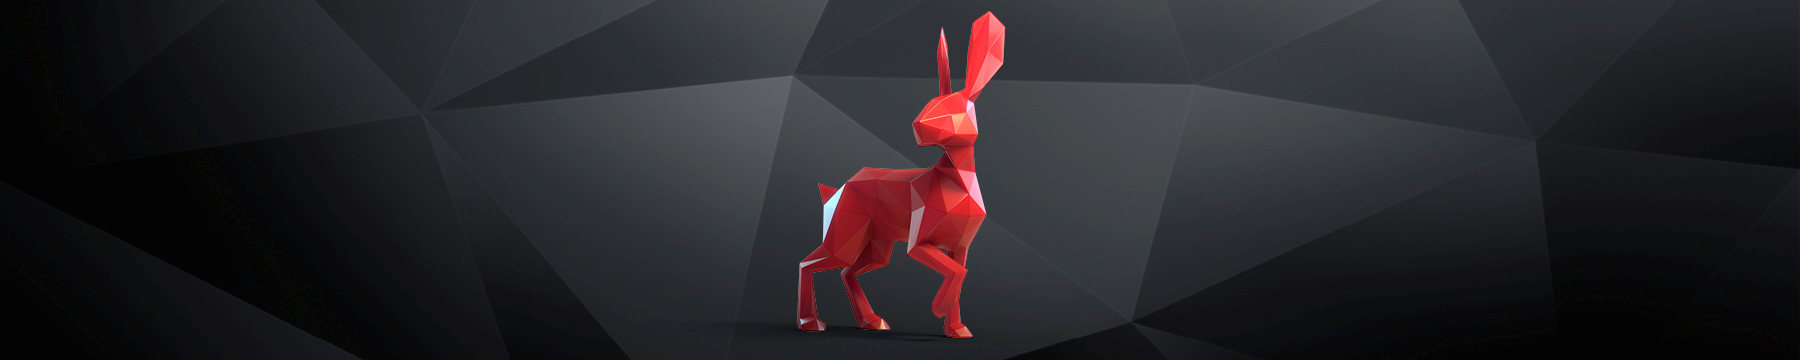 Red hare